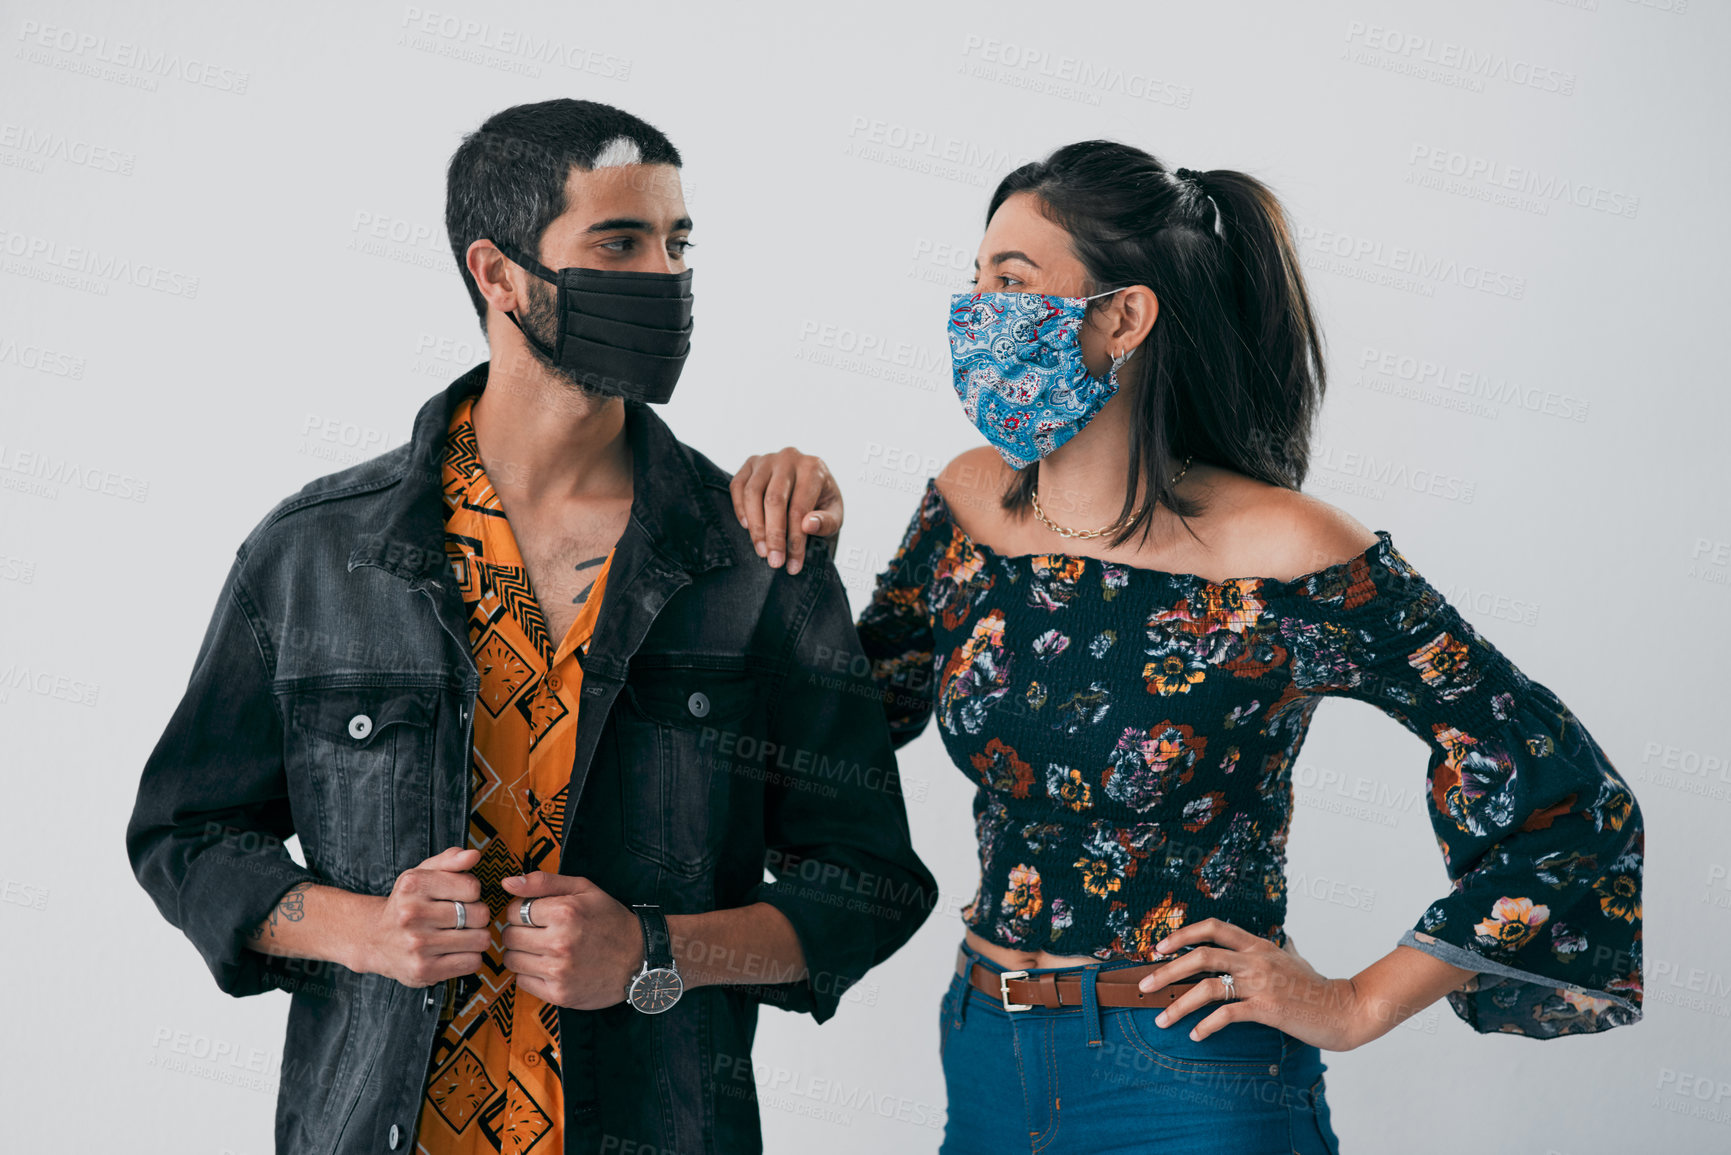 Buy stock photo Studio shot of a masked young man and woman posing against a grey background